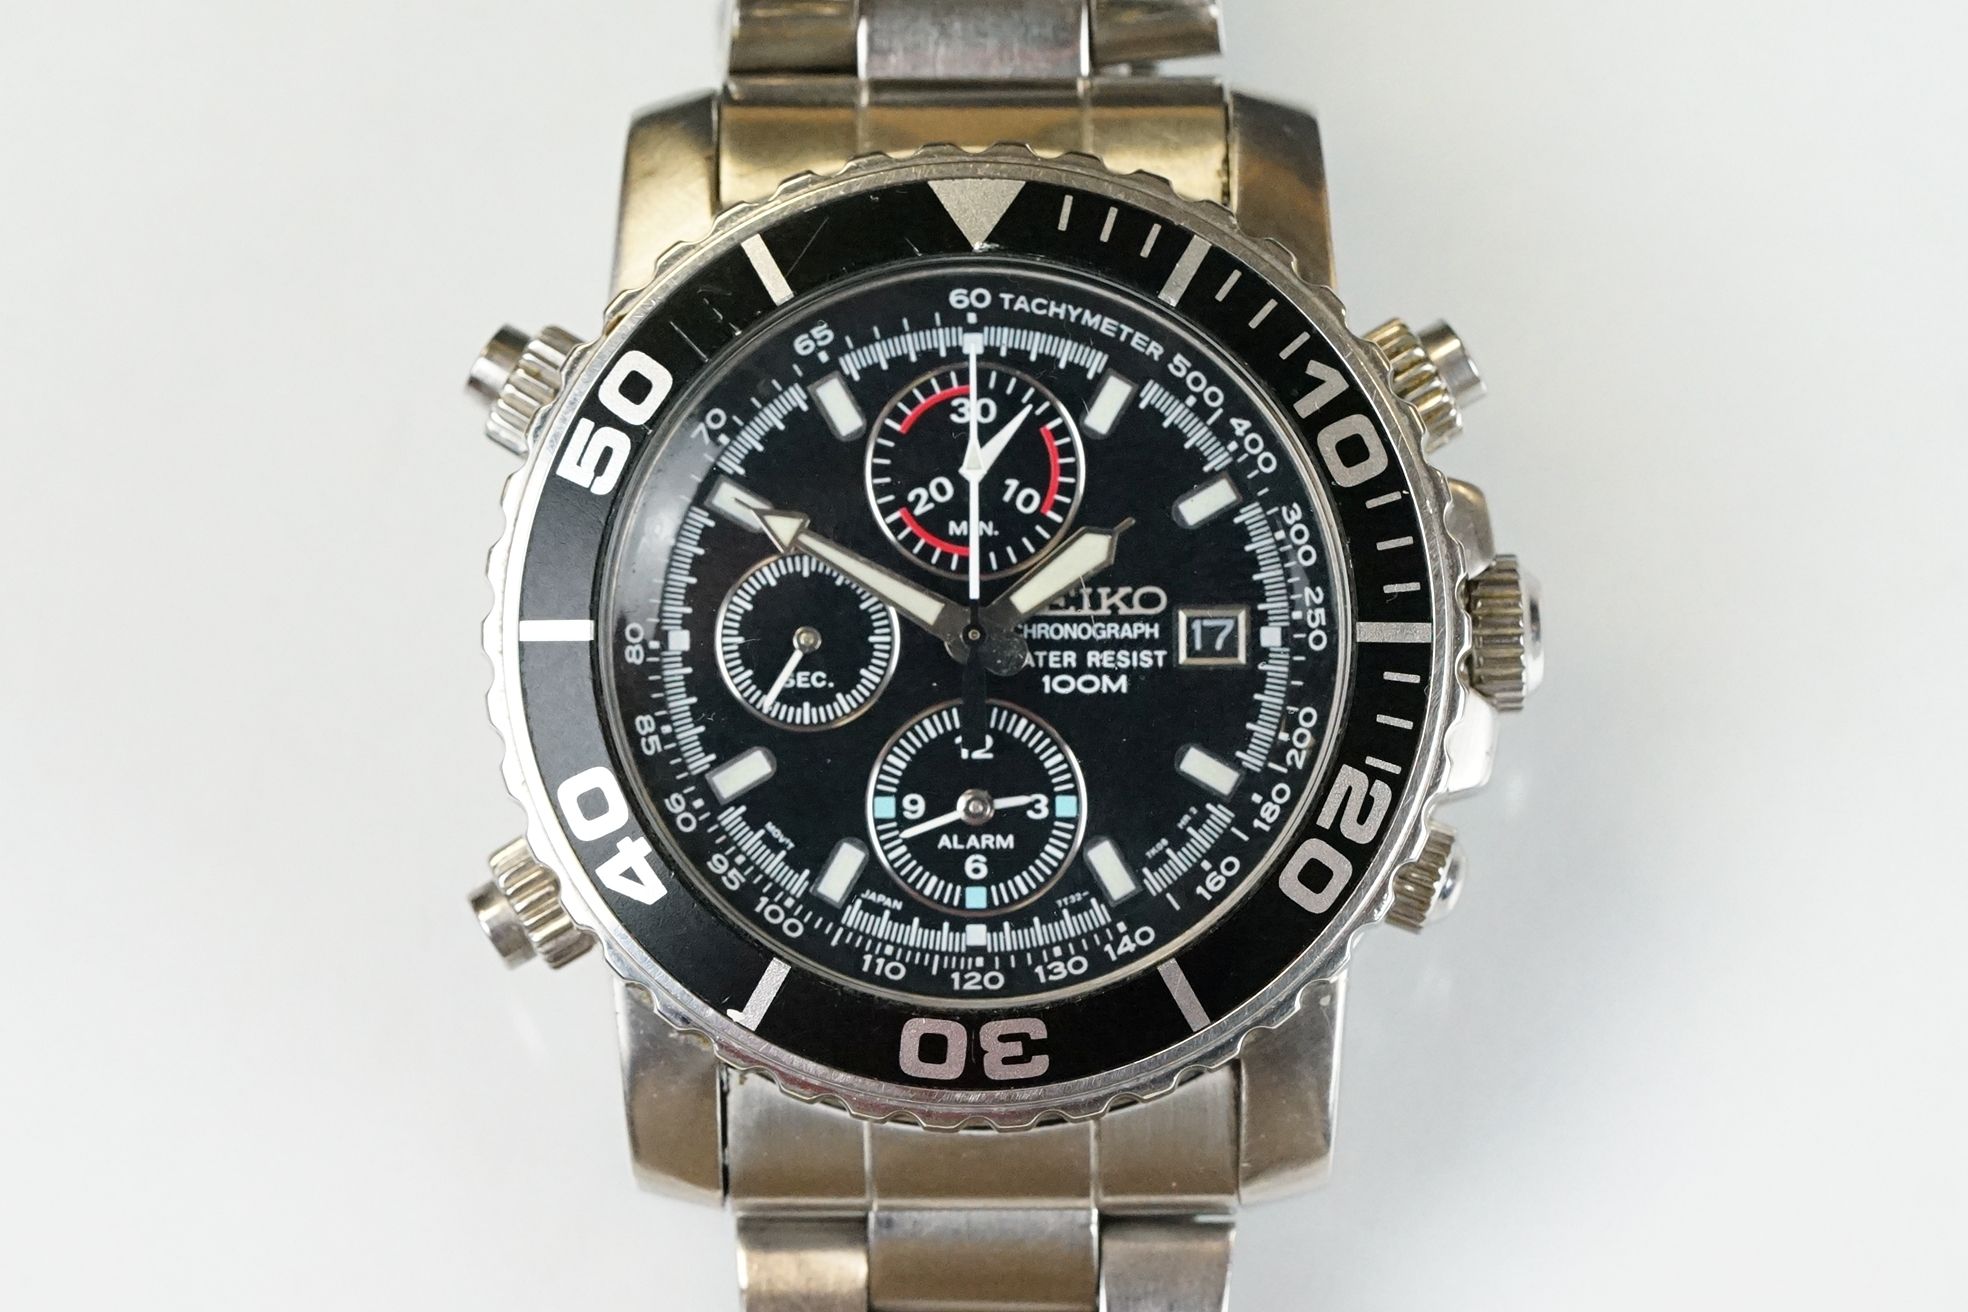 A gents Seiko Chronograph 100m water resistant wristwatch, three central sub dials, date function to